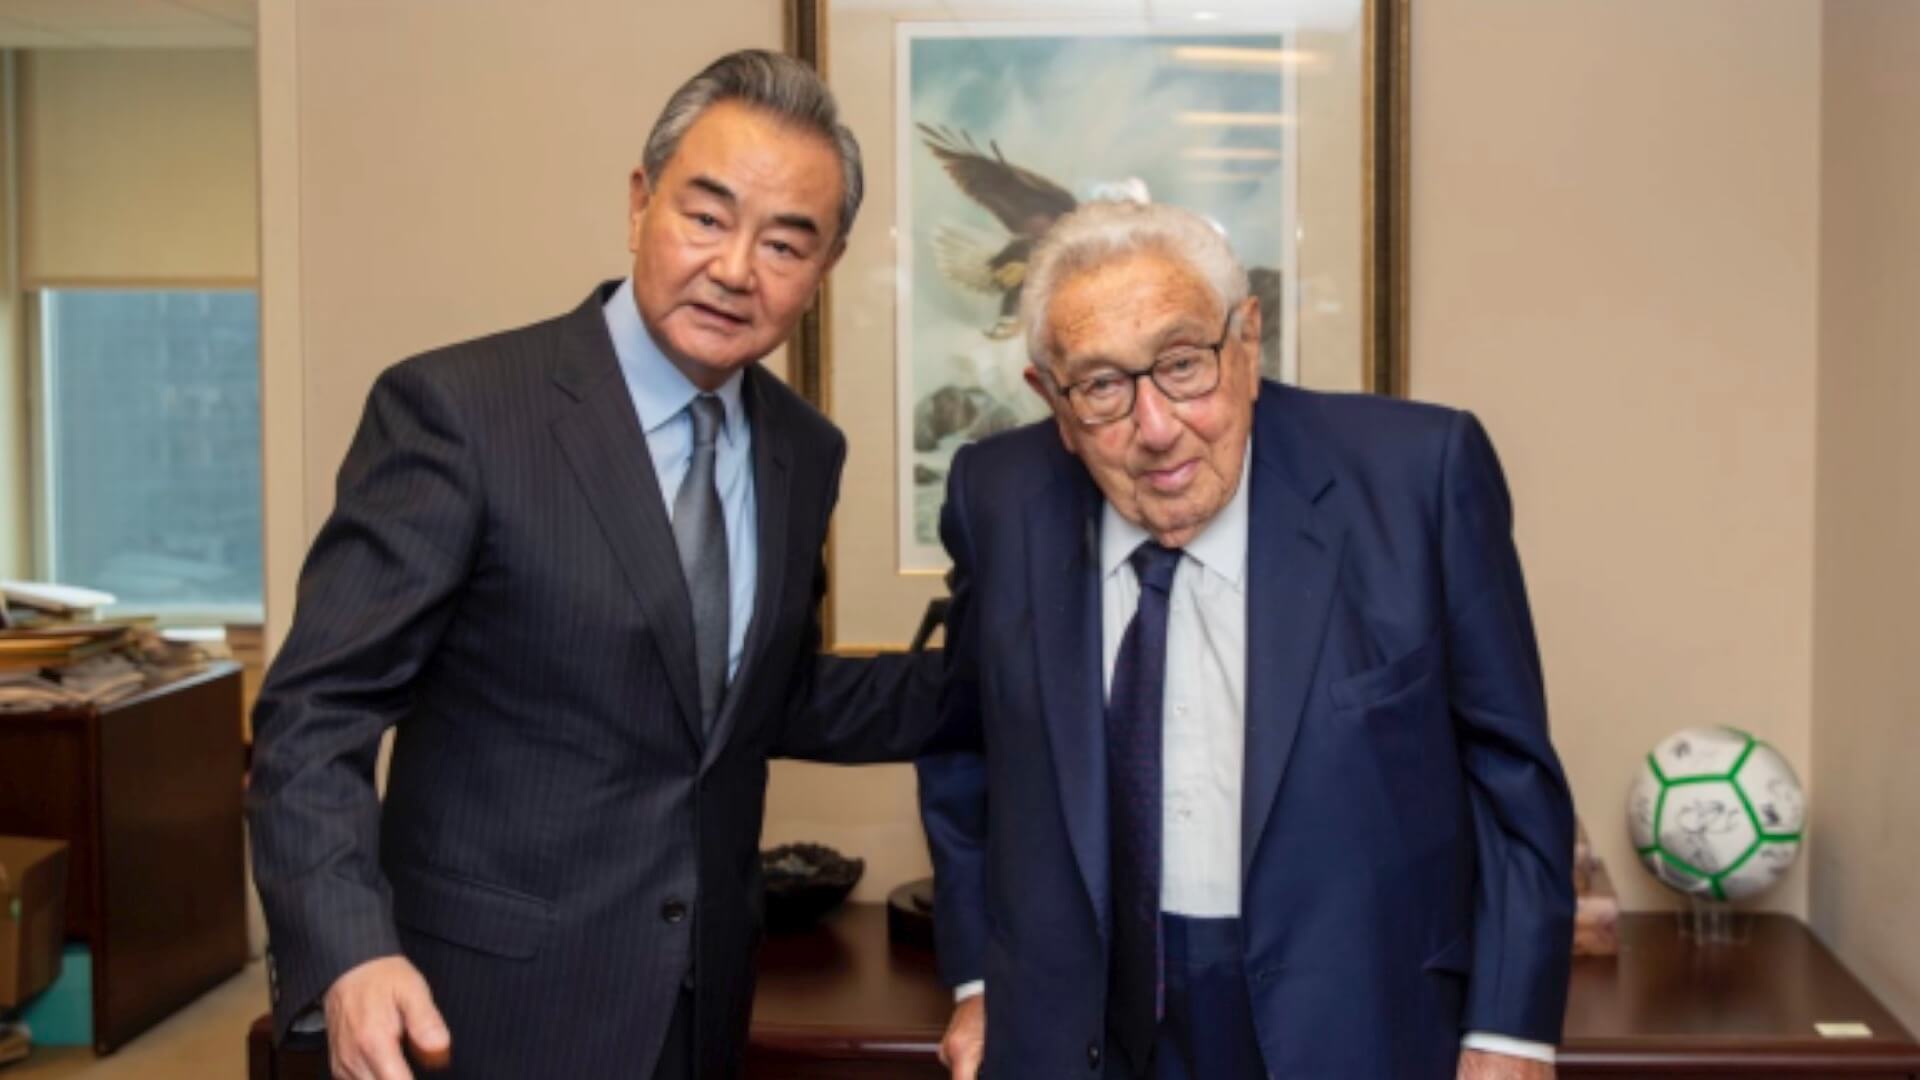 In Meeting with Kissinger, China Urges the US to Oppose Taiwan Independence Publicly